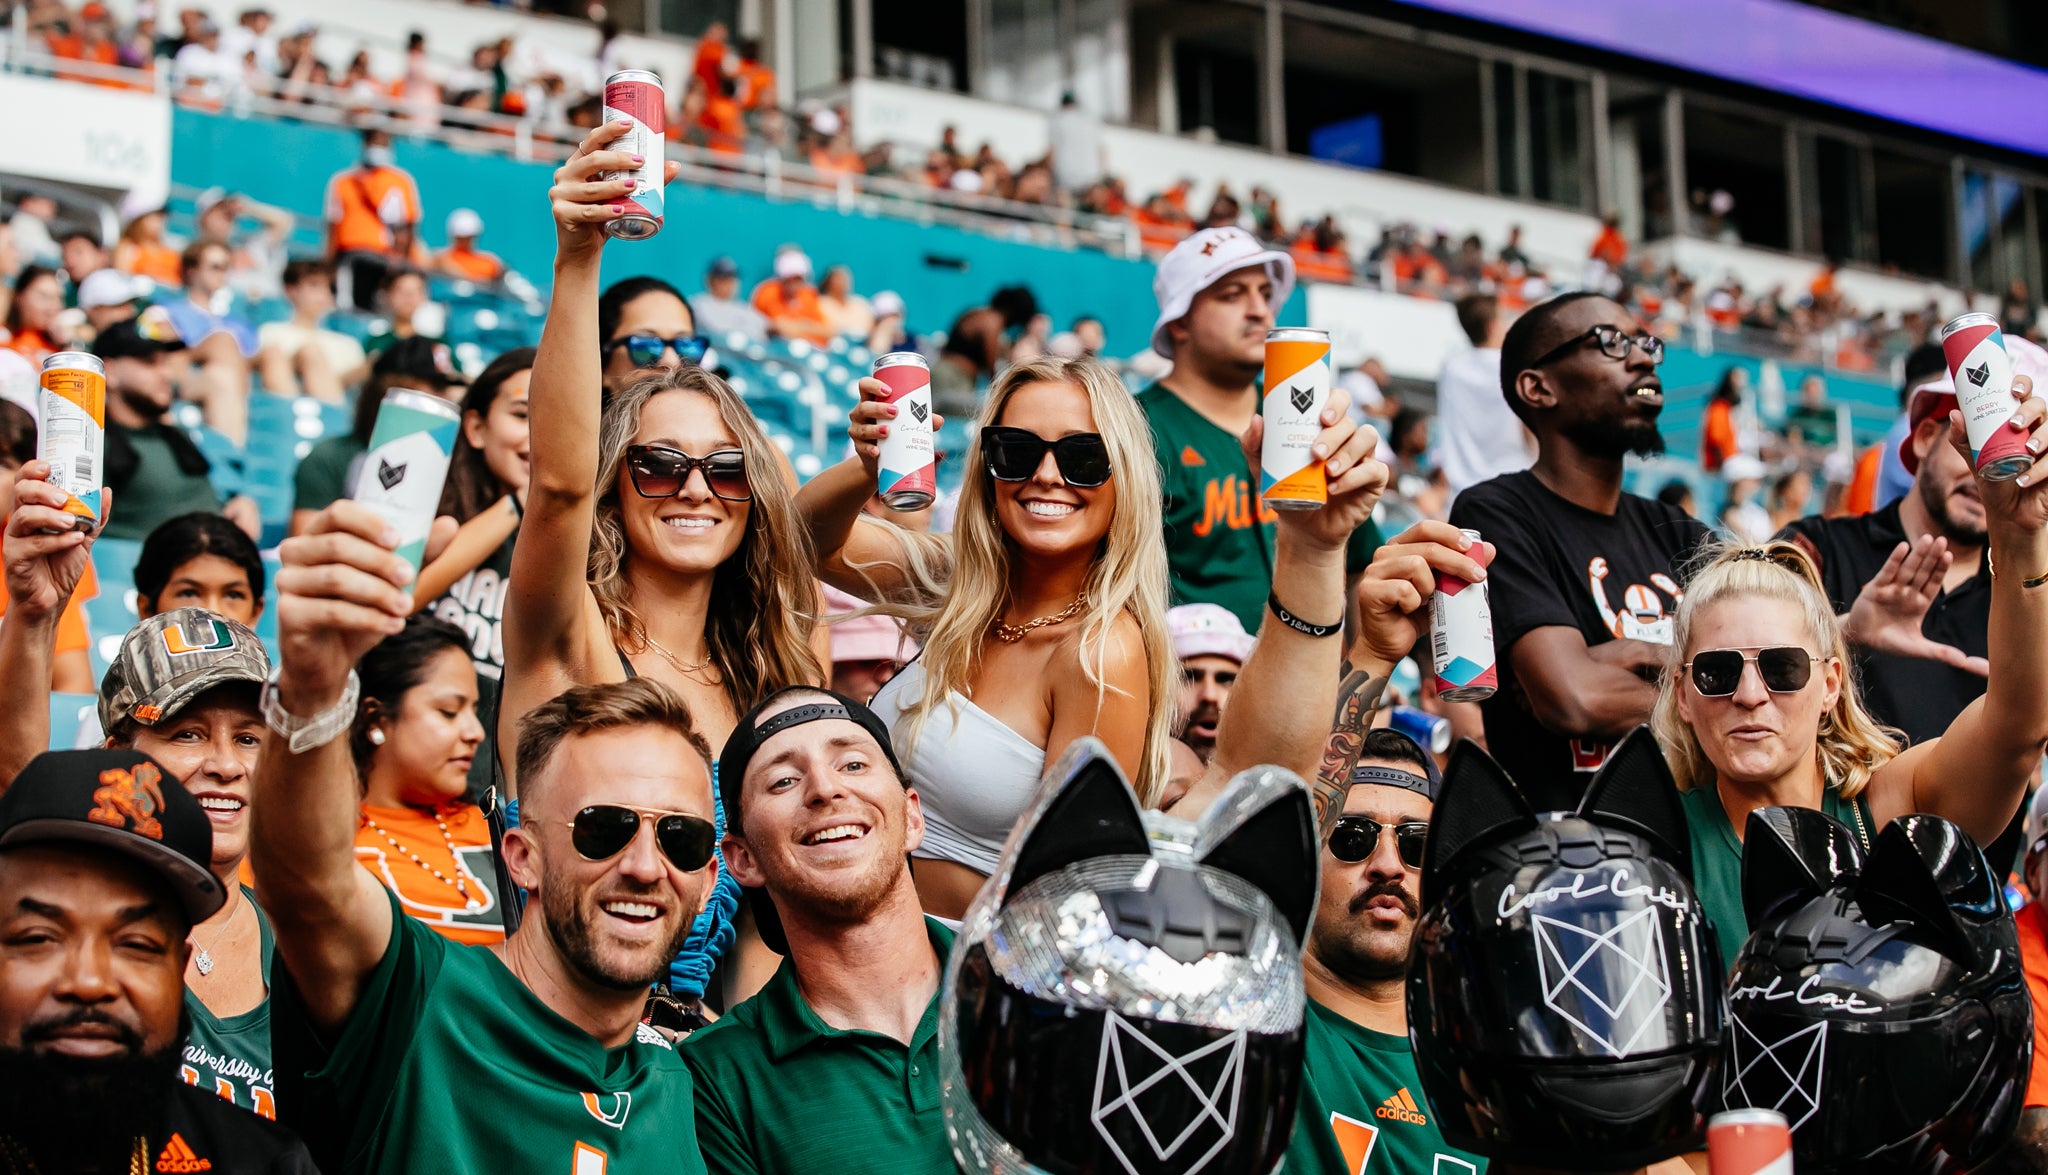 Fans of the University of Miami Hurricanes watch the game while holding Cool Cat Wine Spritzers.